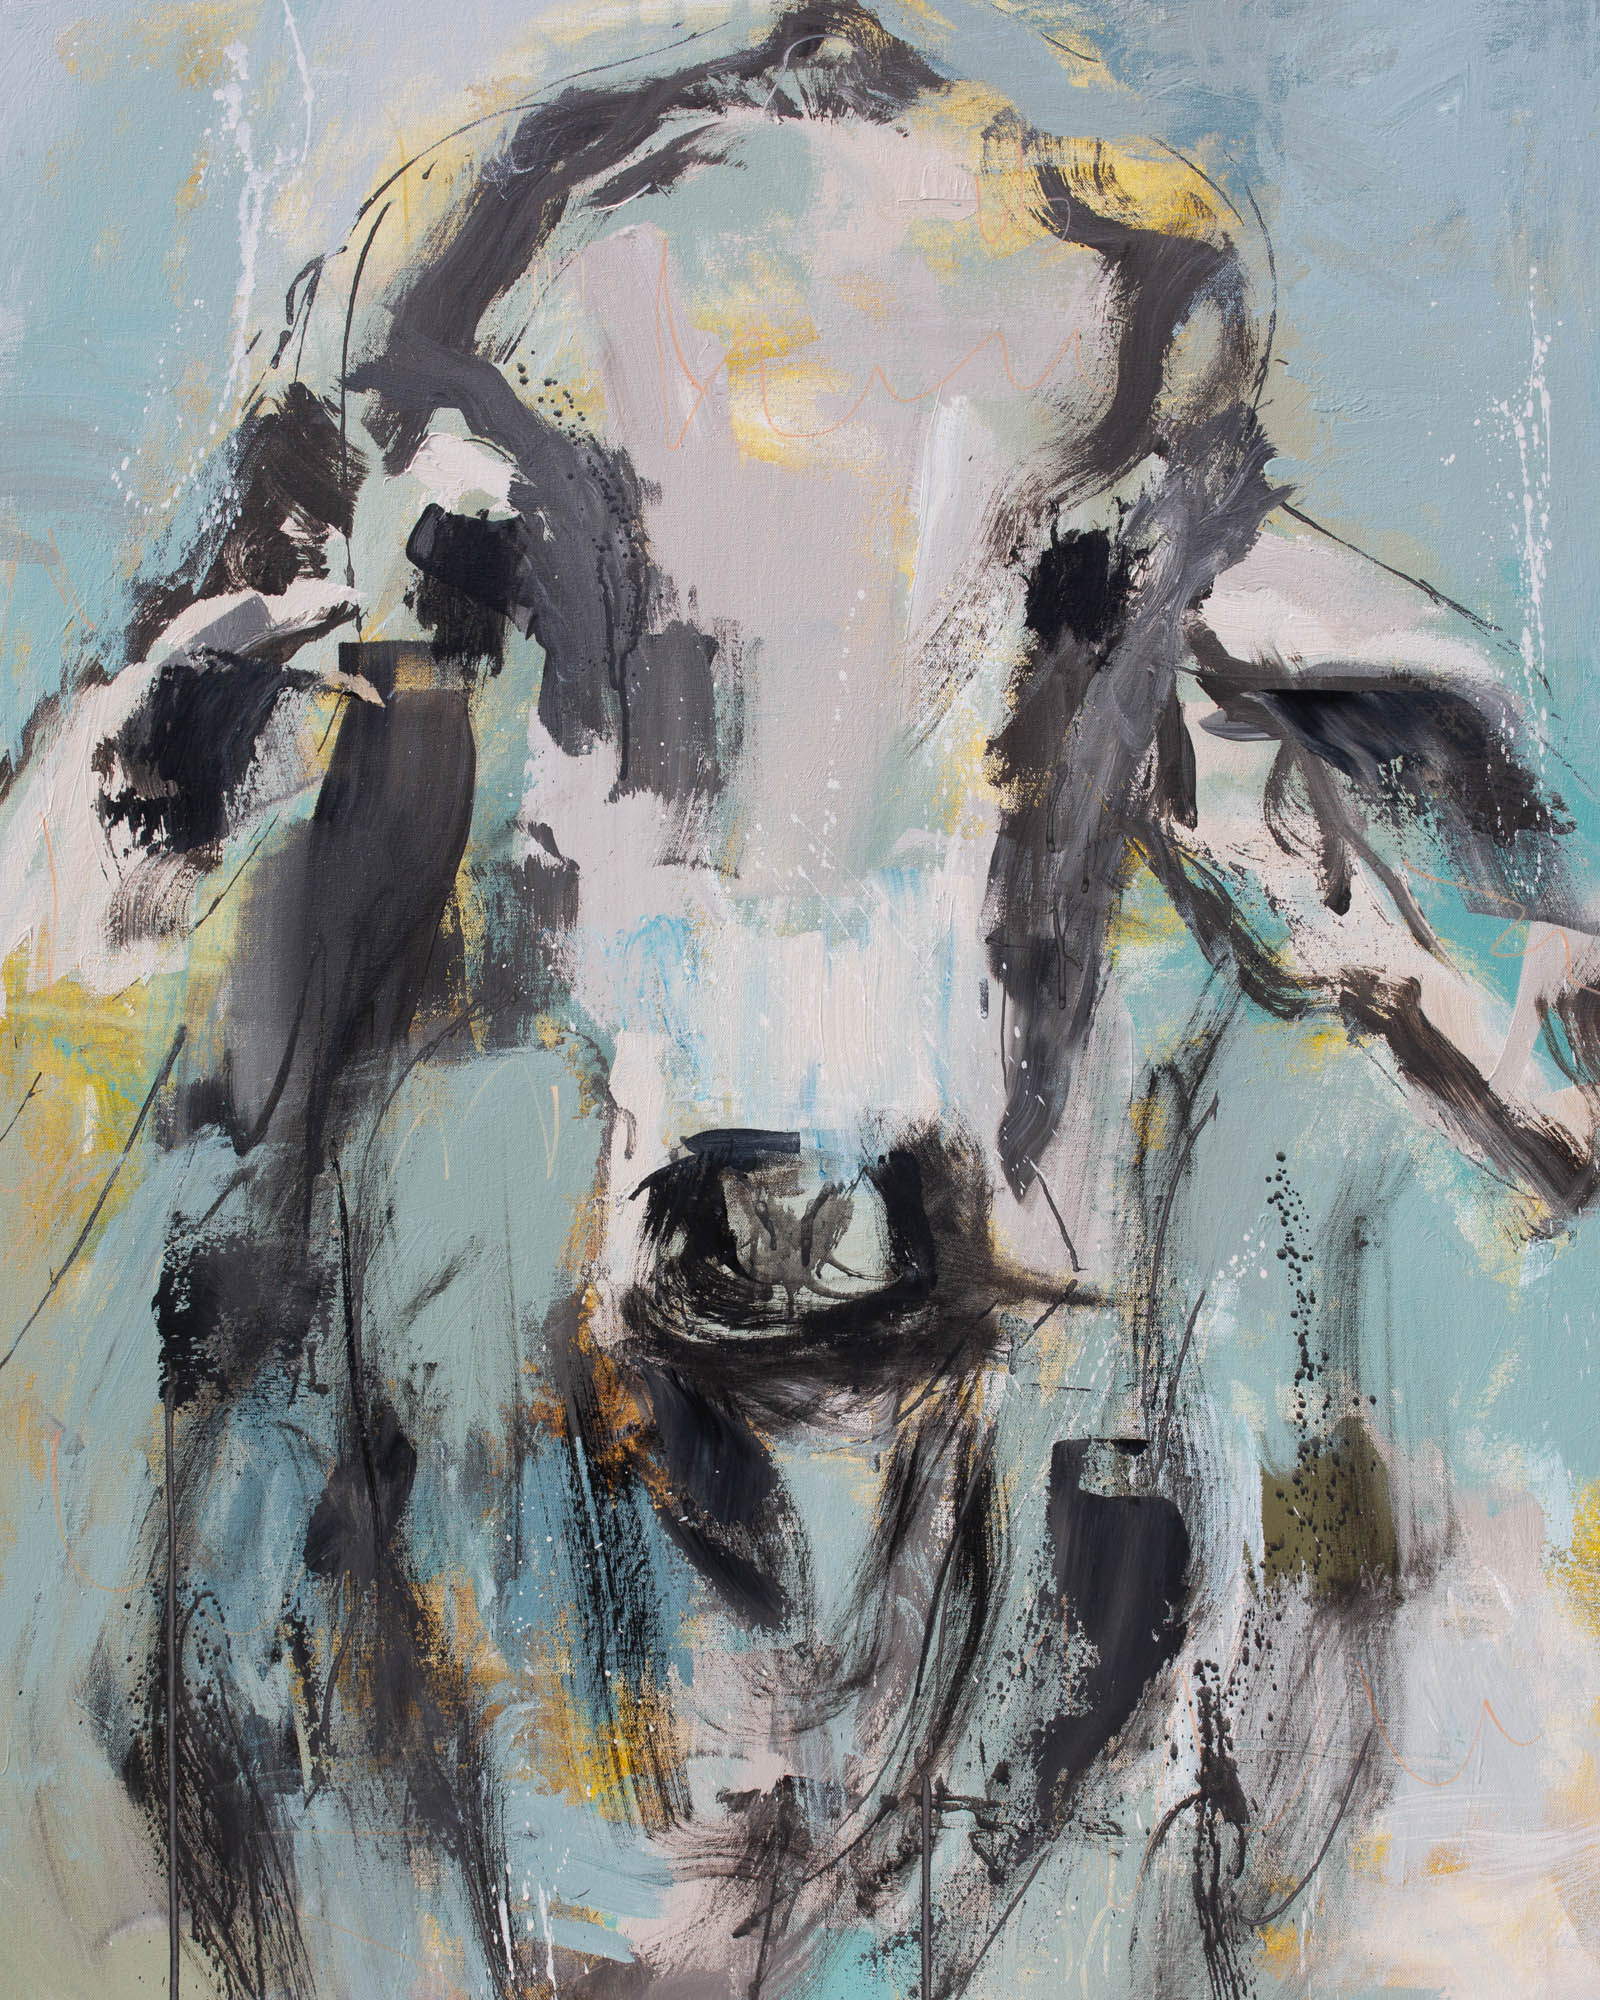 Xena - by Australian Artist Rose Hewartson Original Abstract Cow Painting on Canvas Framed 96x123 cm Statement Piece